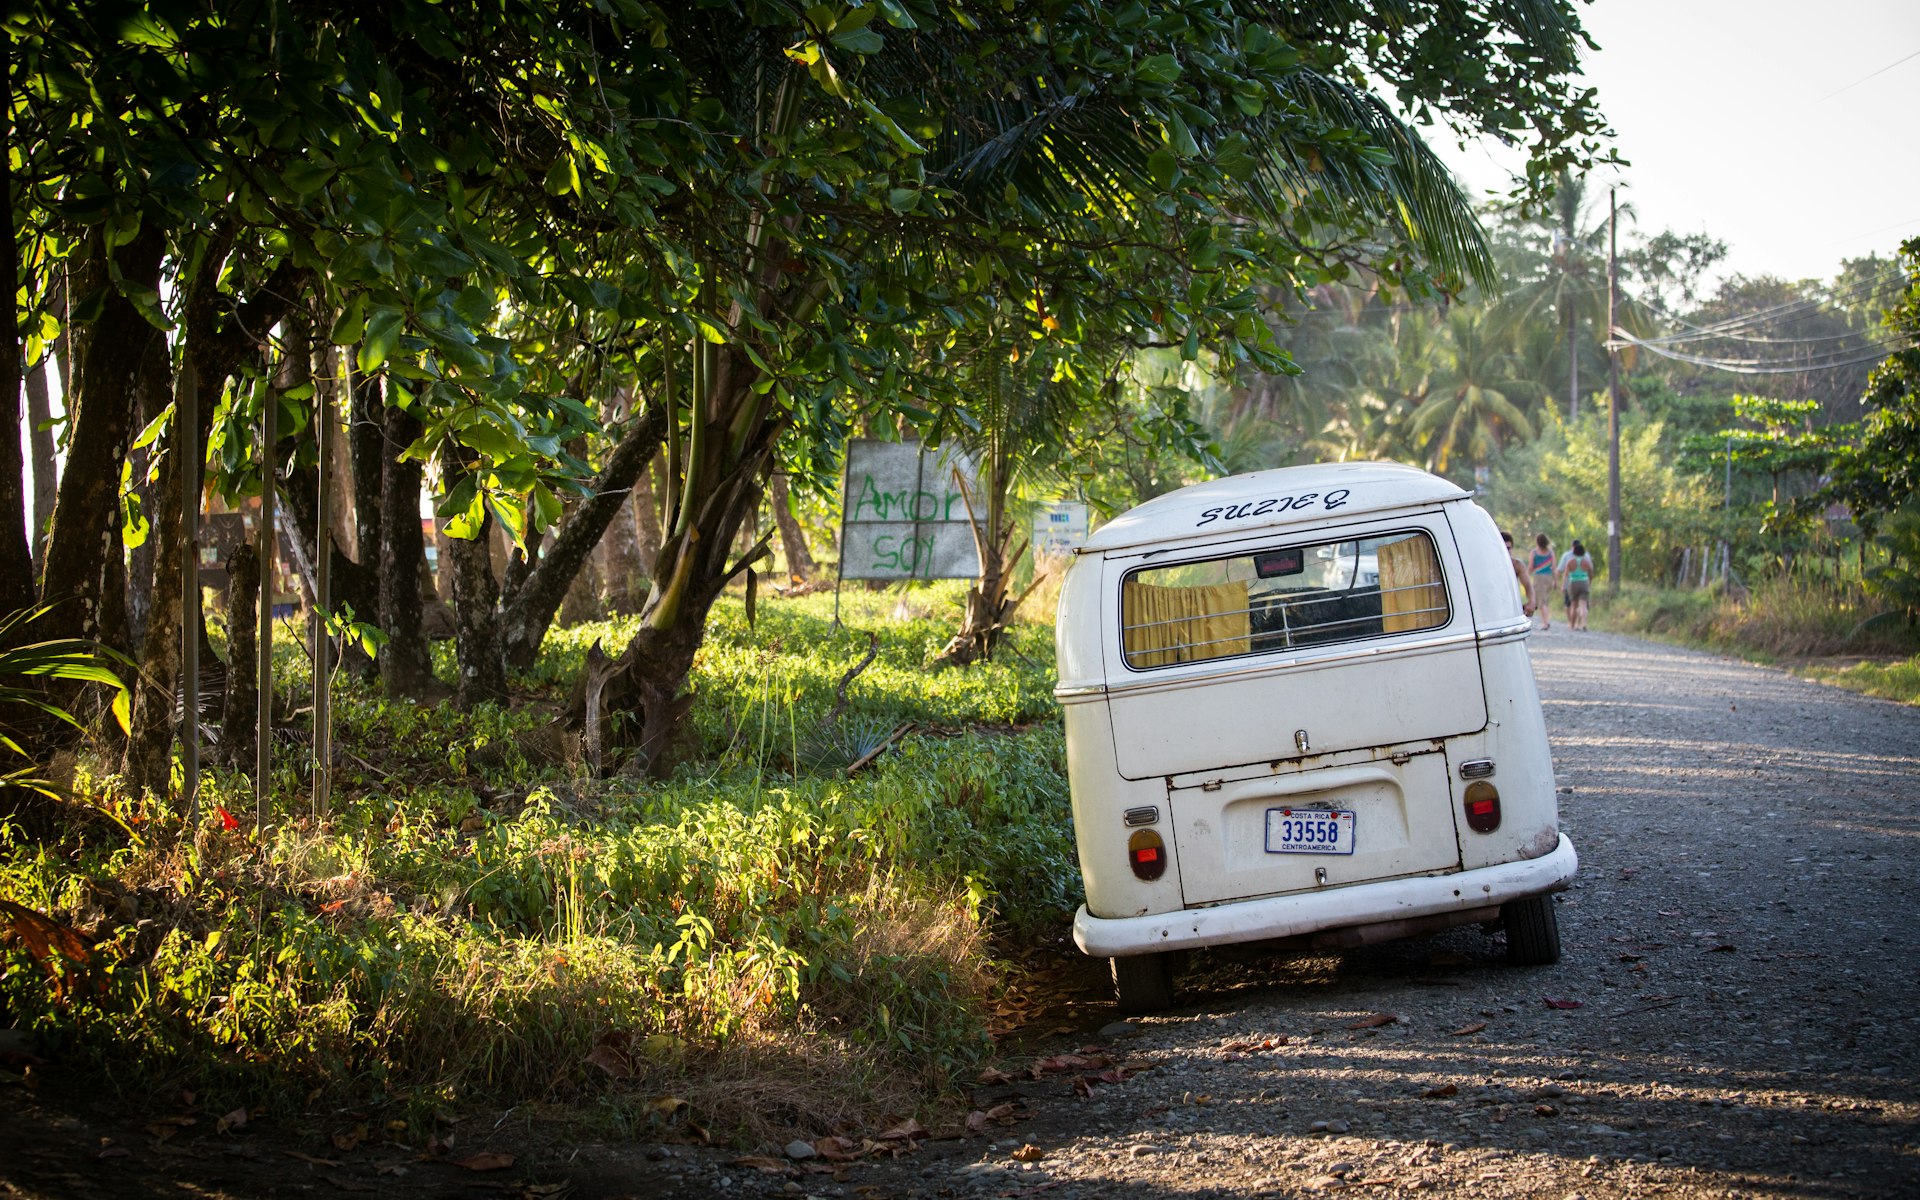 500px Photo ID: 65375367 - A surf board, van, and sun is all you need on the west coast of Costa Rica!